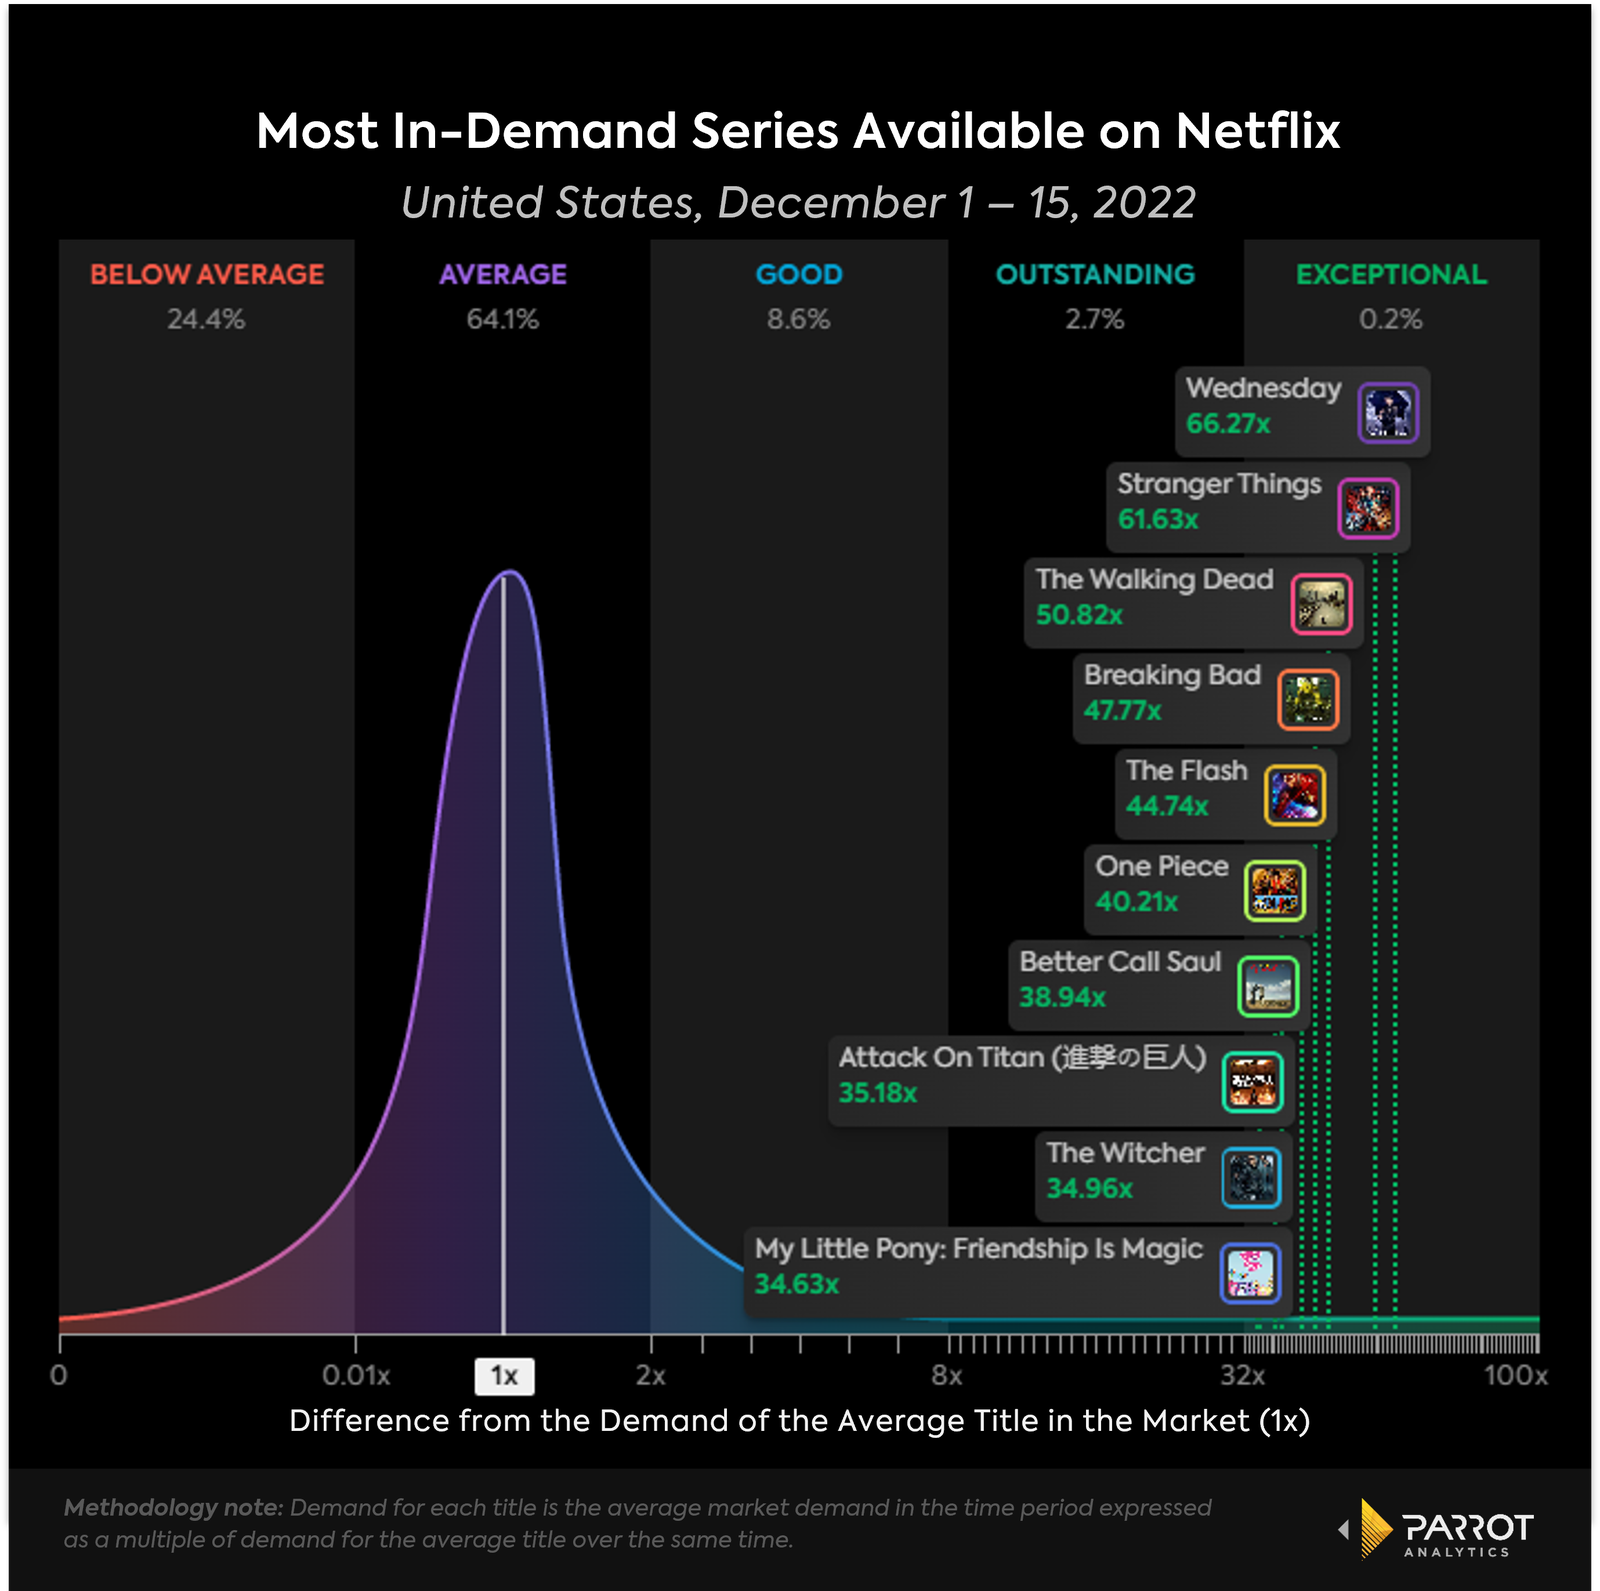 Peacock Rises, HBO Max Falls - The State of Streaming Apps in 2022 · ASO  Tools and App Analytics by Appfigures